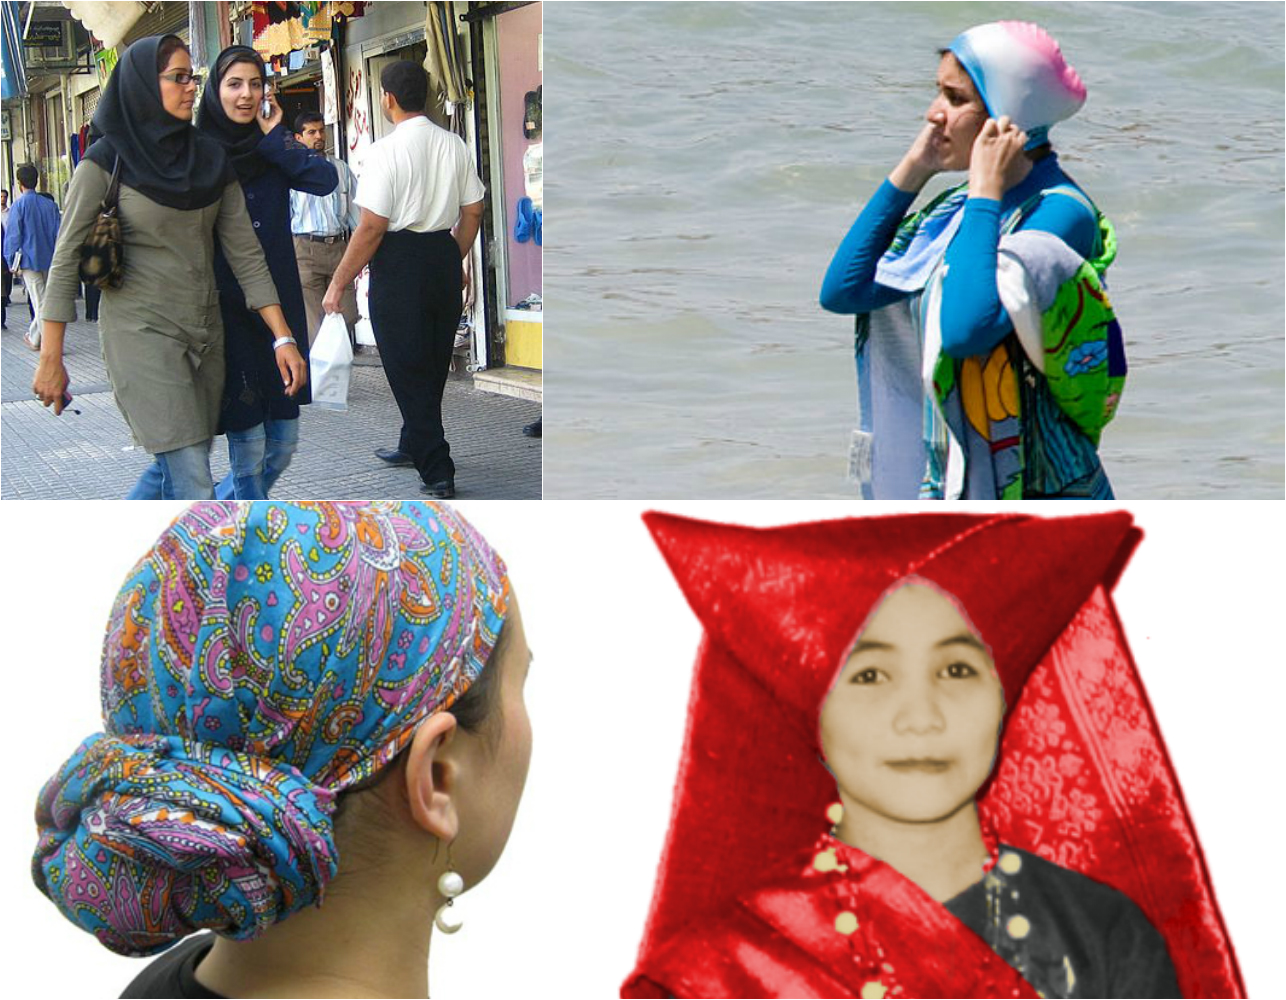 Clockwise from top left: Iranian girls wearing loose headscarves with manteau, a long jacket/coat (Image: Zoom Zoom), the 'Burkini' (Image: Cool Burkini), Muslim Minangkabau lady from the Indonesian island of Sumatra with traditional non-Islamic headgear (Image: Michael J Lowe), and a tichel style head covering popular among some Muslim Turkish women (Image: Anna Gold)